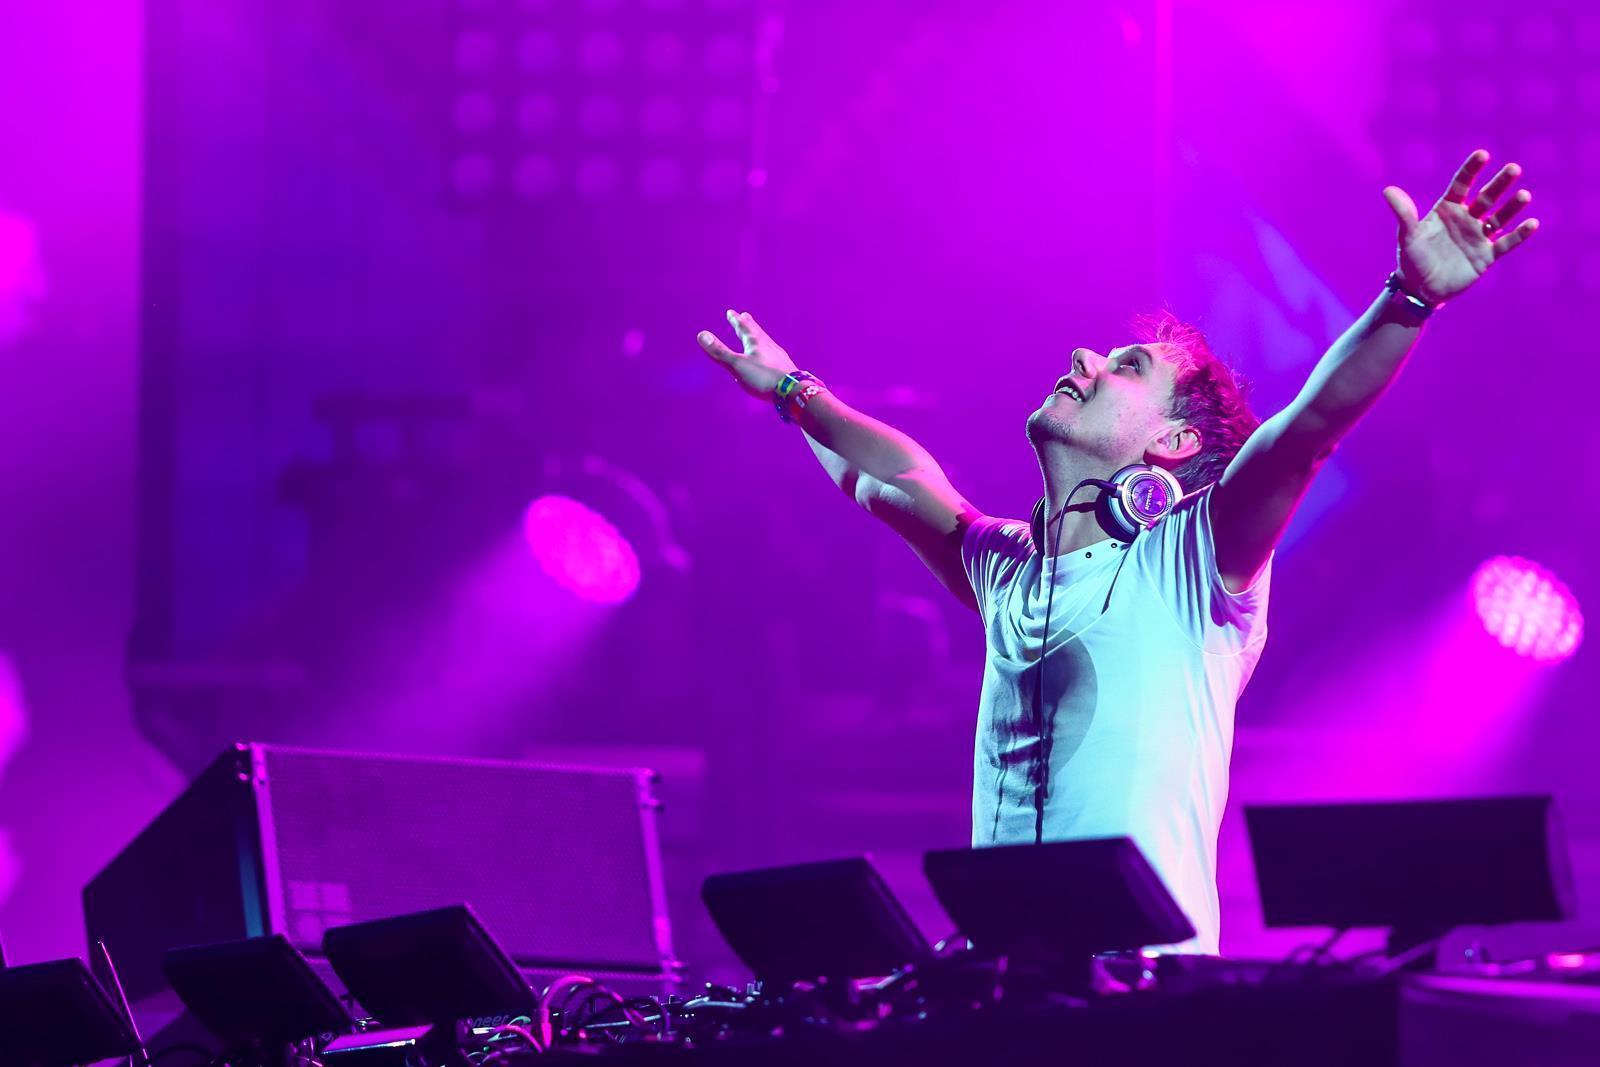 Armin van Buuren releases &;A State of Trance, Volume 9′ prior to